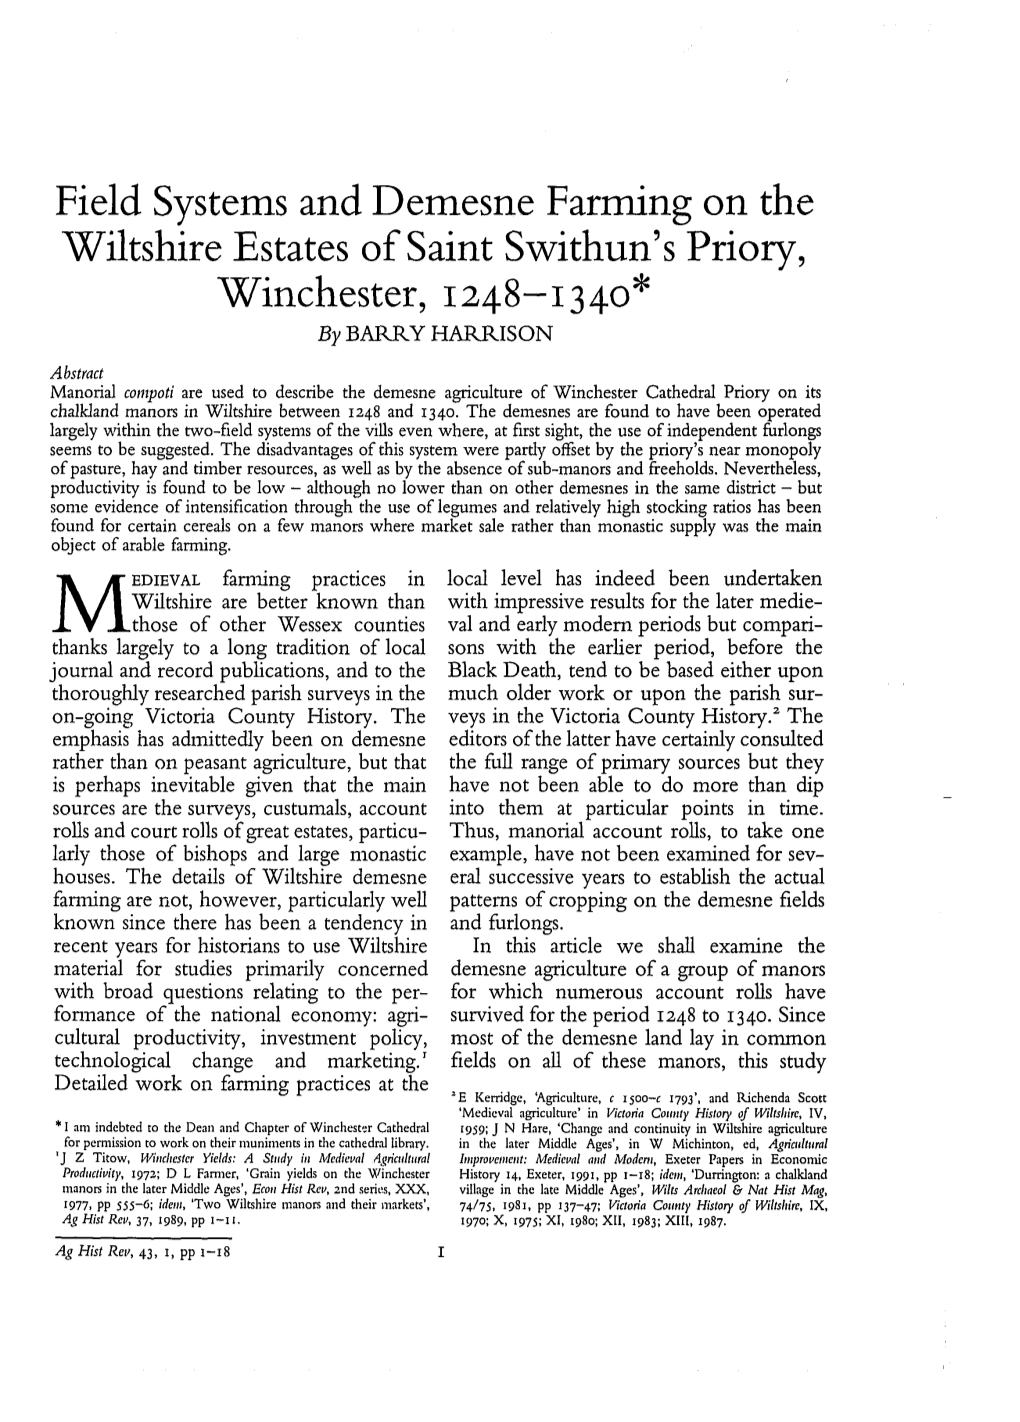 Field Systems and Demesne Farming on the Wiltshire Estates of Saint Swithun's Priory, Winchester, I248-134O* by BAN KY HAR KISON